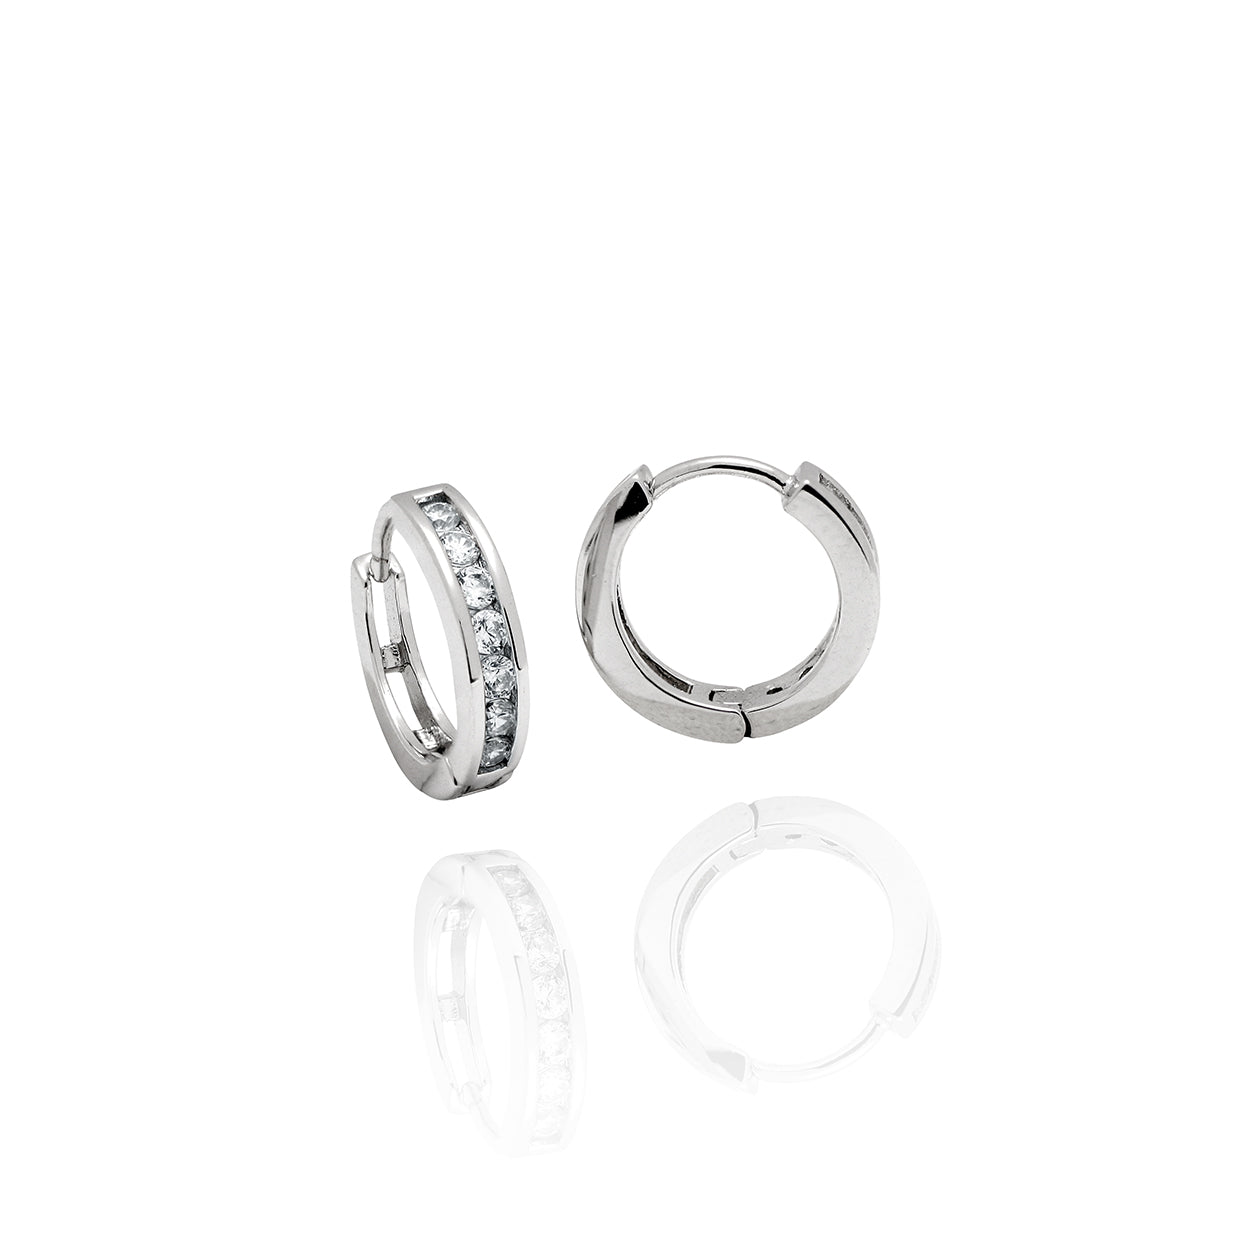 Sterling Silver Huggie Style Earrings set with Cubic Zirconia